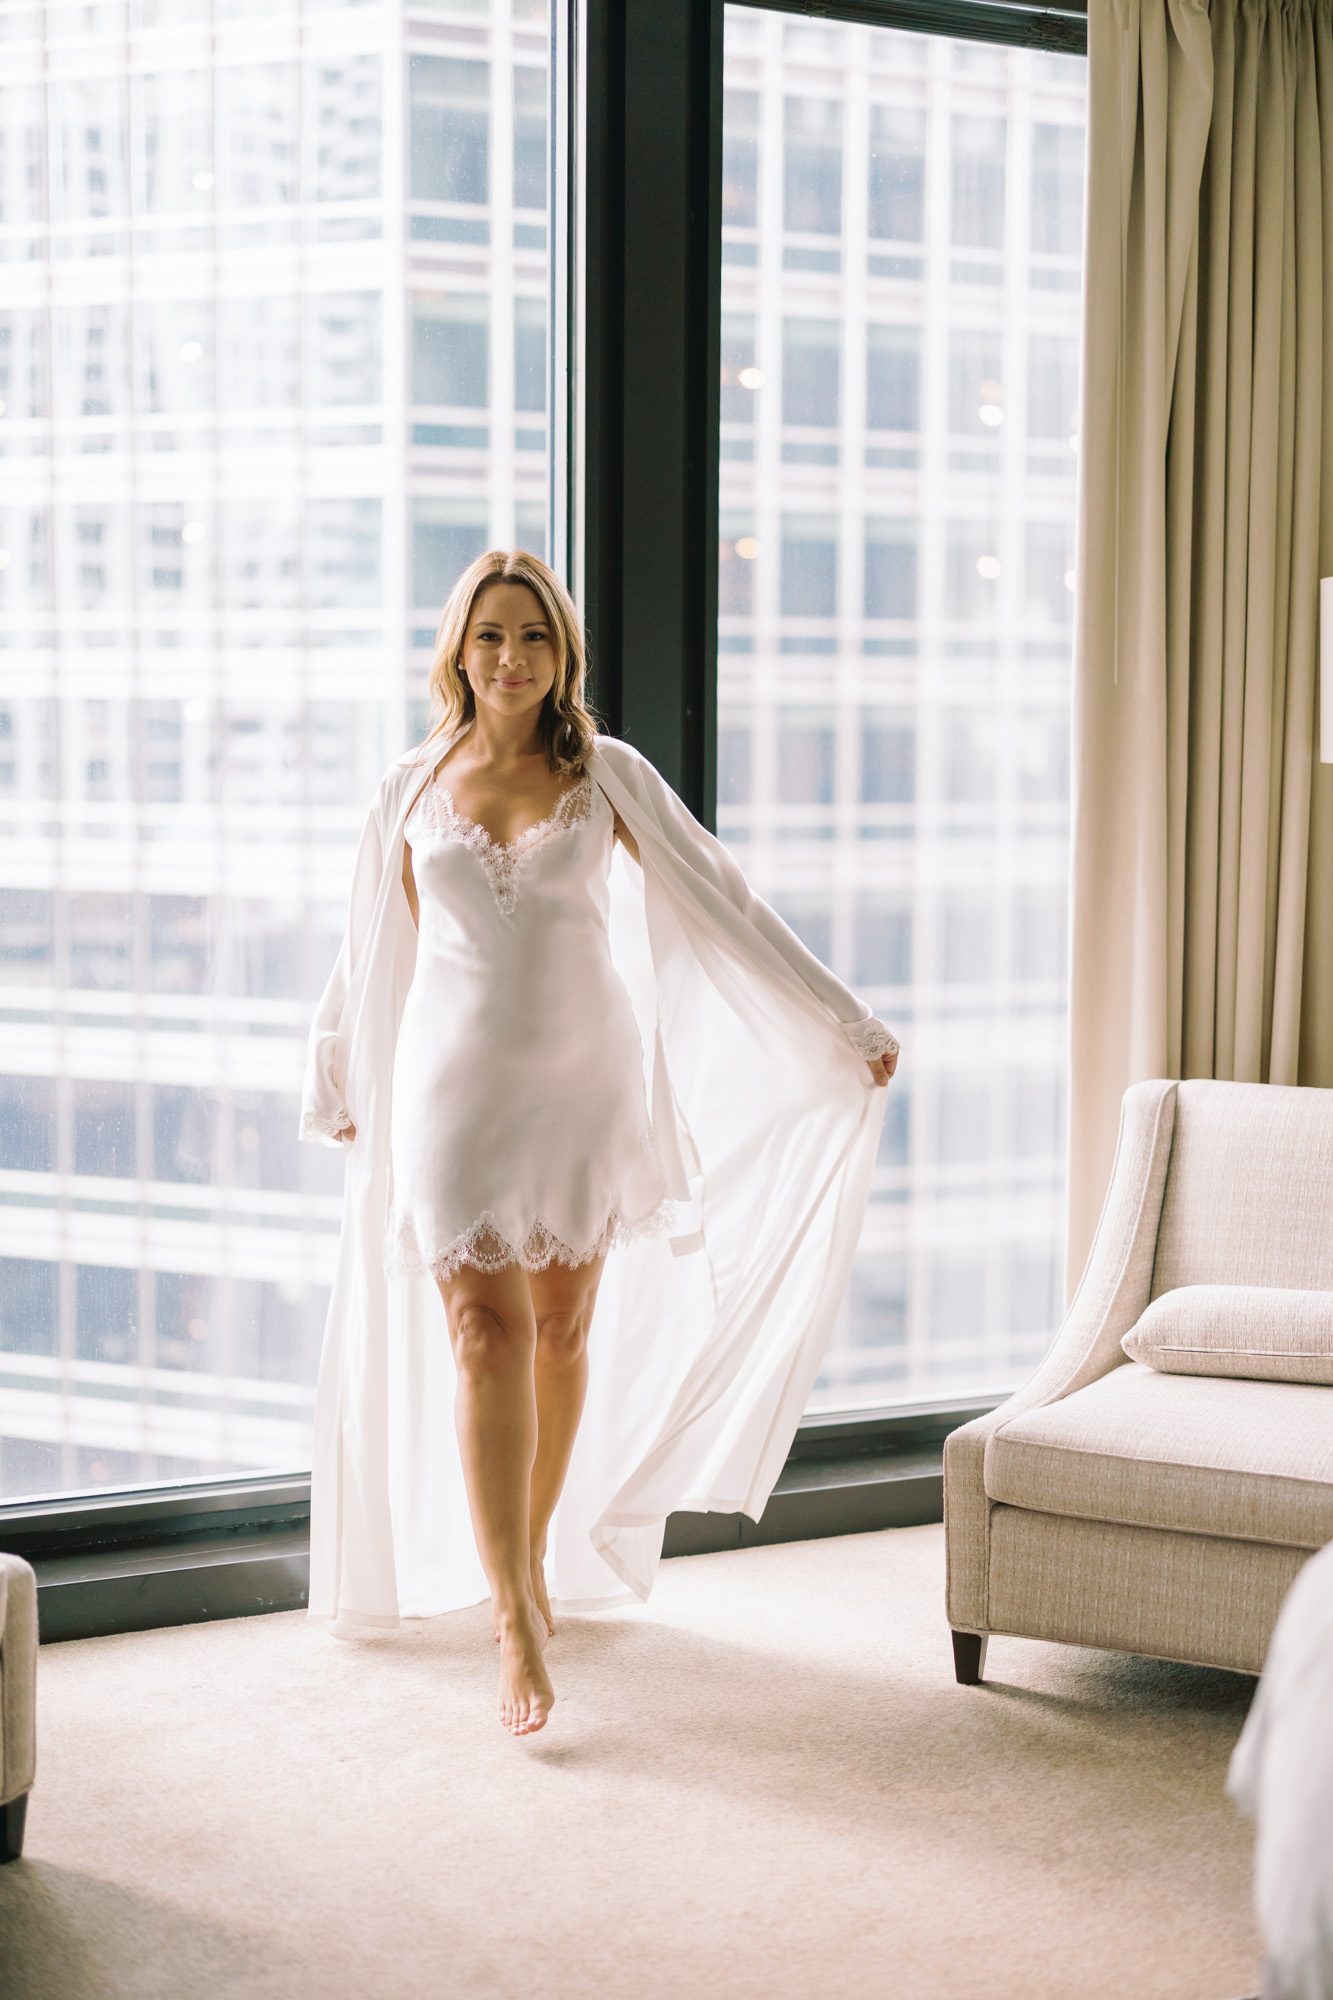 A glamorous boudoir photo session at the Langham in Chicago.